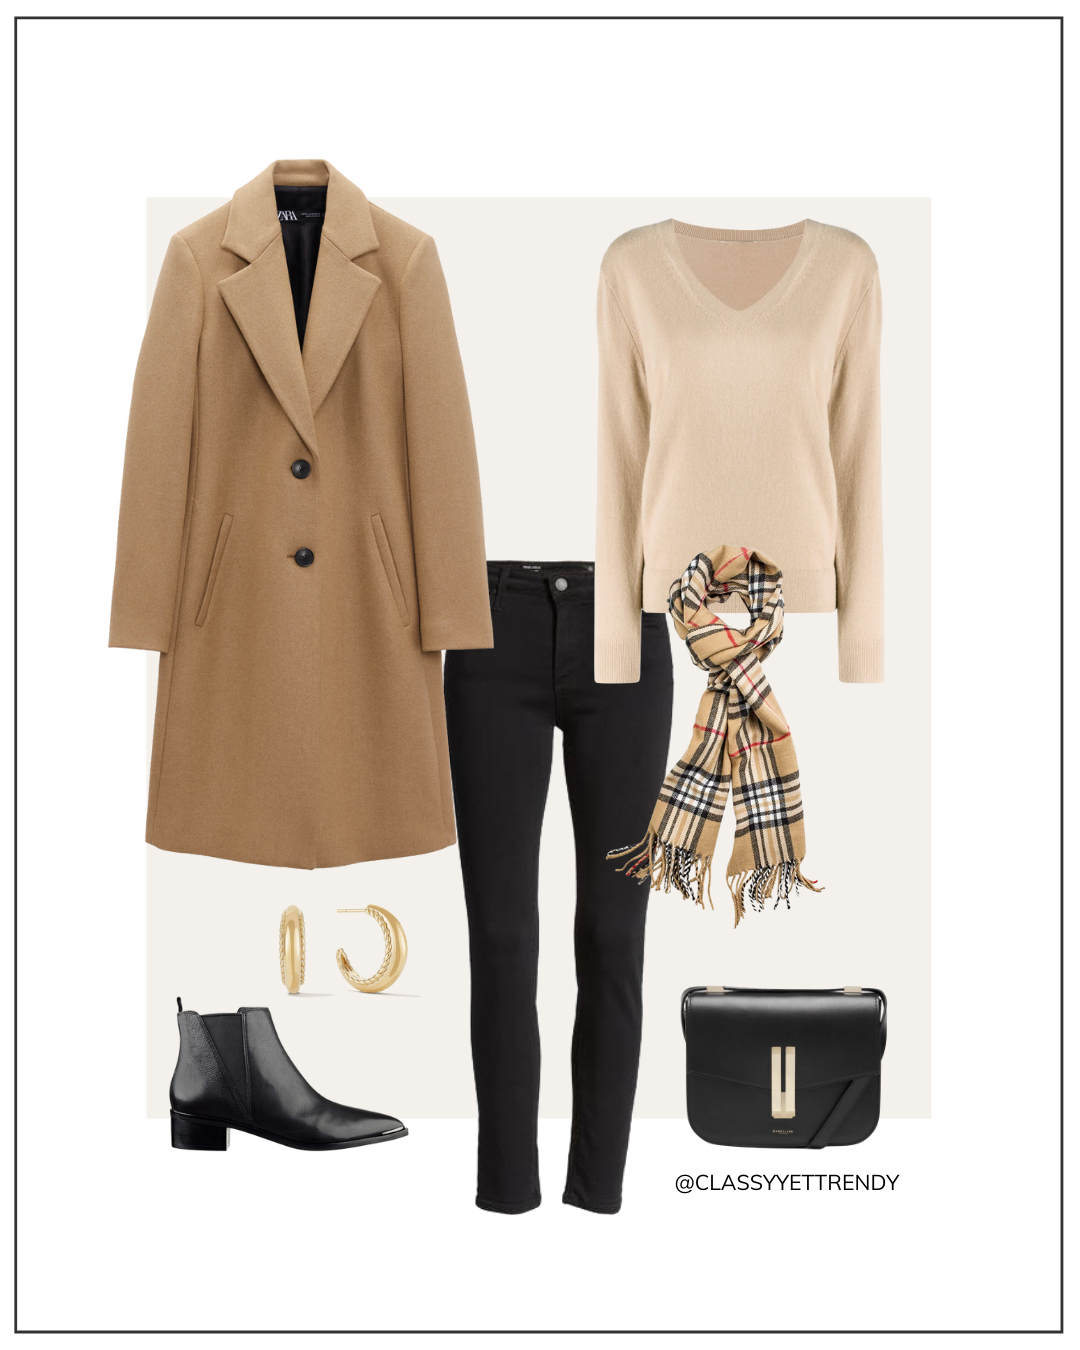 Winter Outfits Using Wardrobe Staples ...